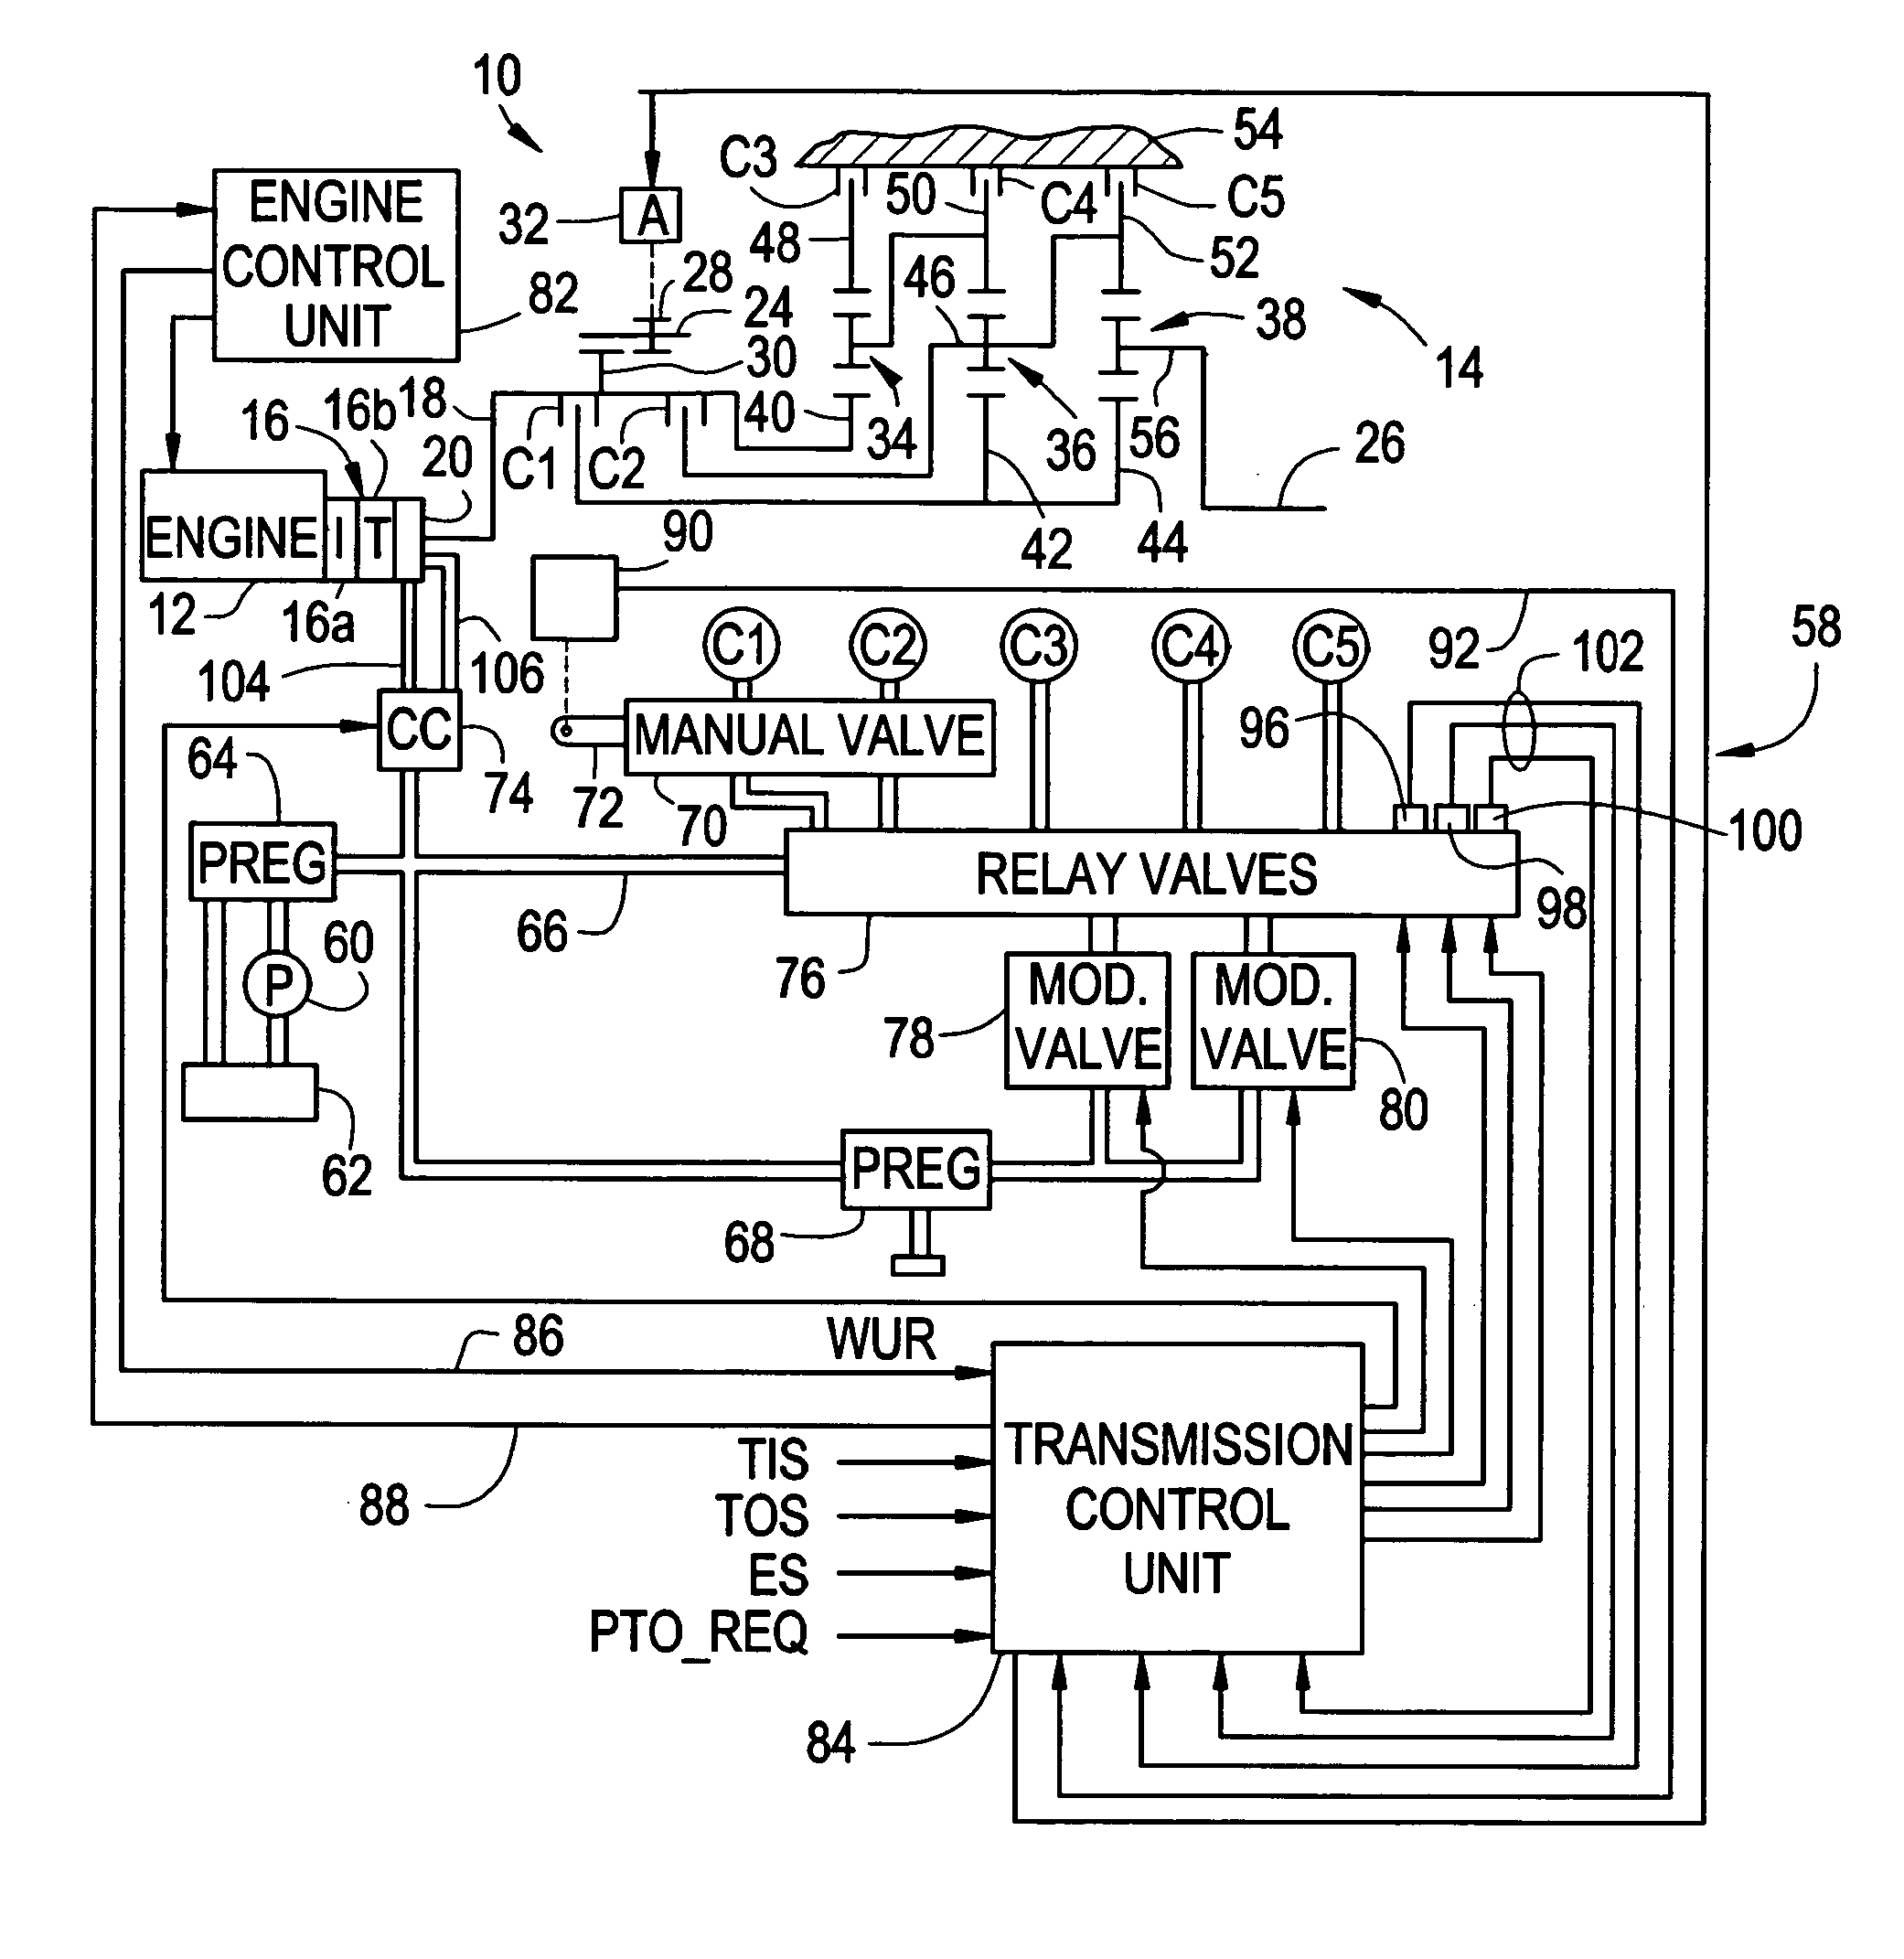 Method and apparatus for synchronized PTO control in a motor vehicle powertrain